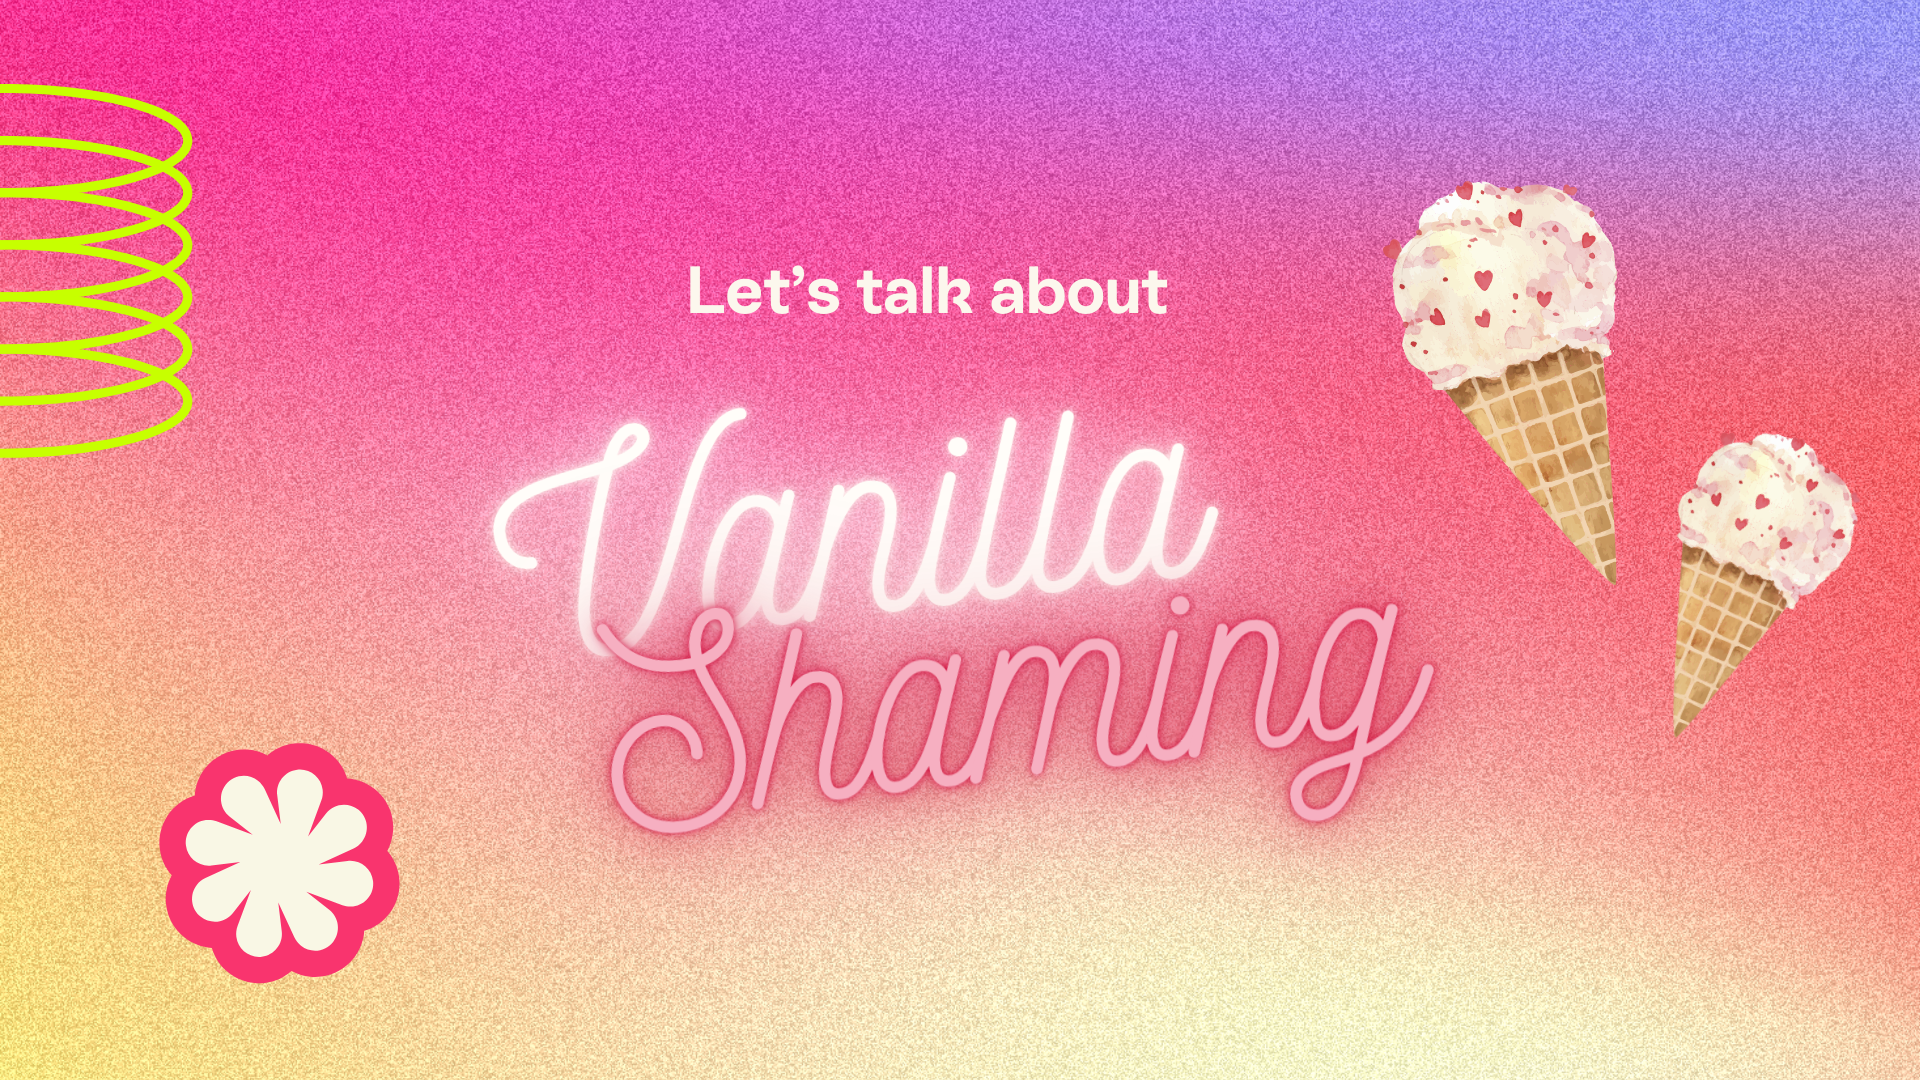 It's about time we spoke about vanilla shaming